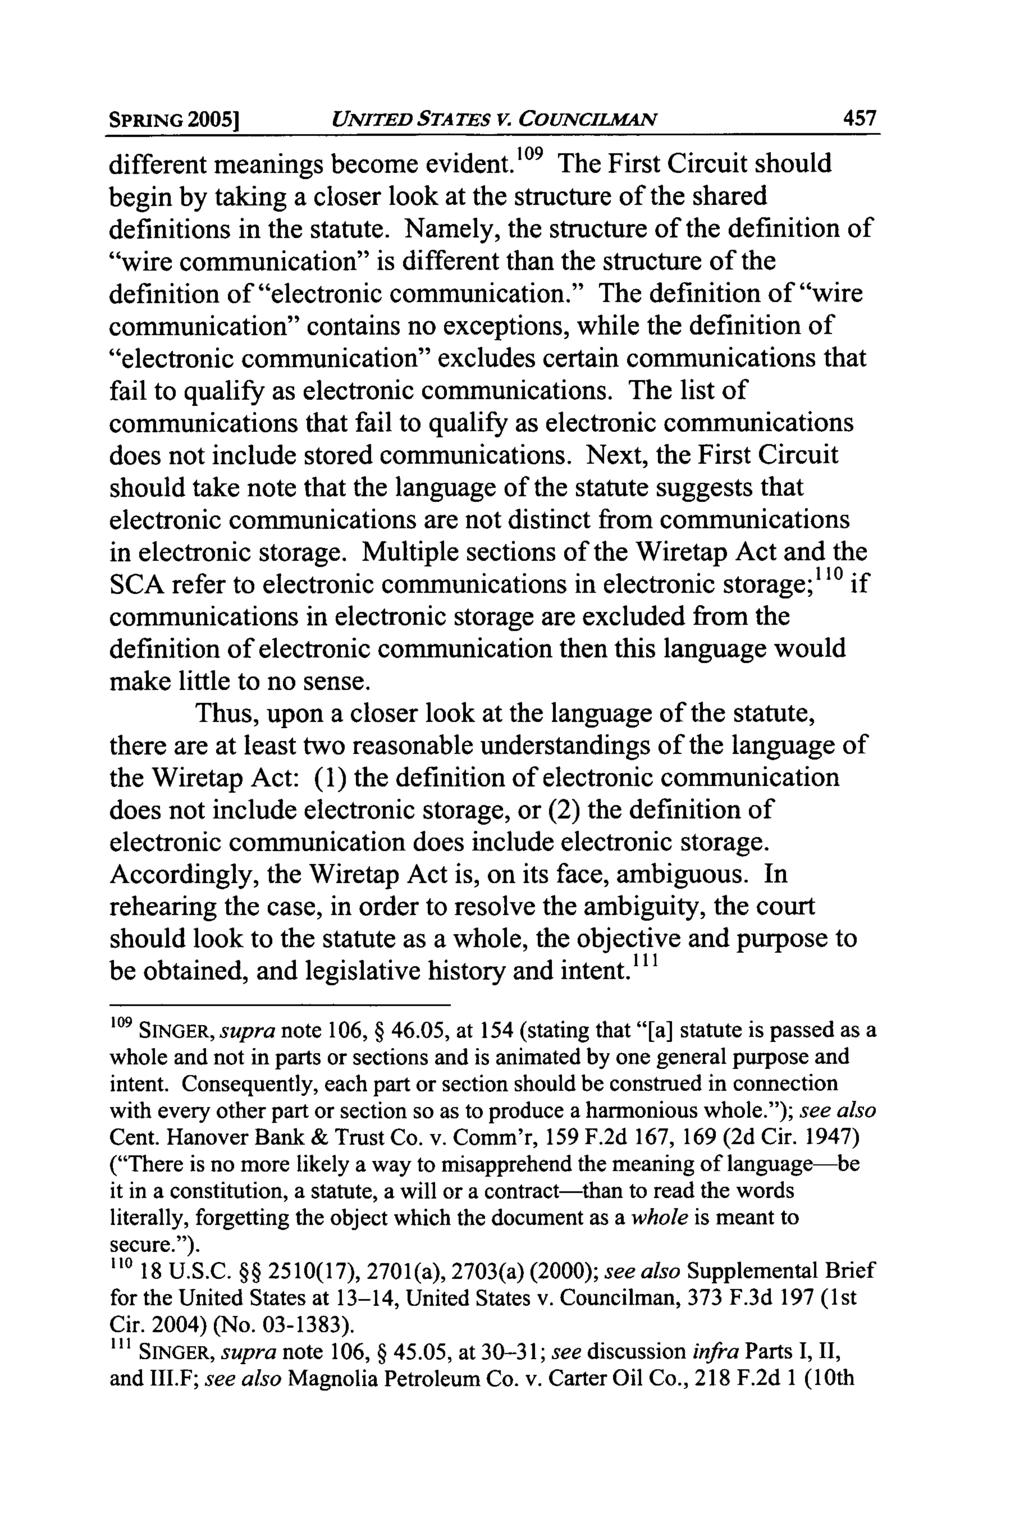 SPRING 2005] UNITED STATES V. COUNCILMANV different meanings become evident.' 0 9 The First Circuit should begin by taking a closer look at the structure of the shared definitions in the statute.